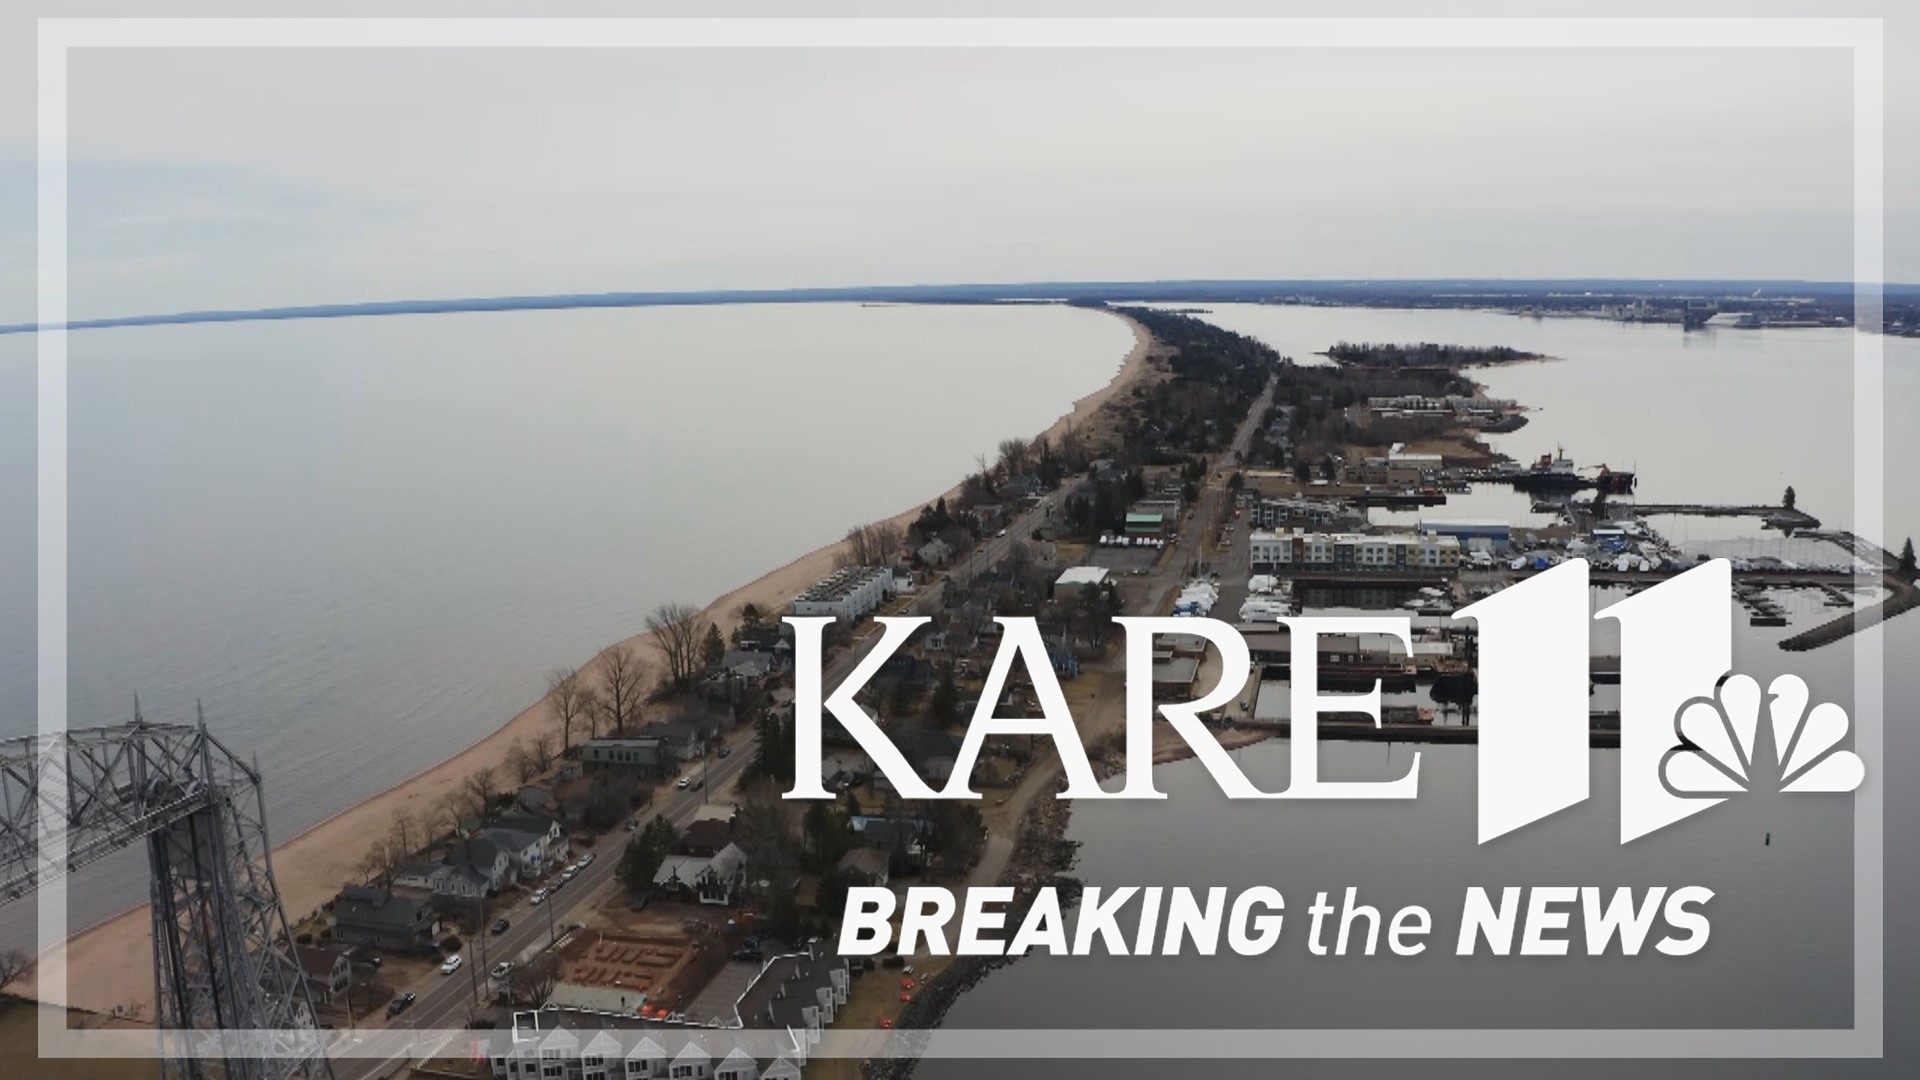 Kathy Cargill told The Wall Street Journal she planned to "spruce up" the neighborhood of Park Point in Duluth but now won't do anything "to benefit that community."